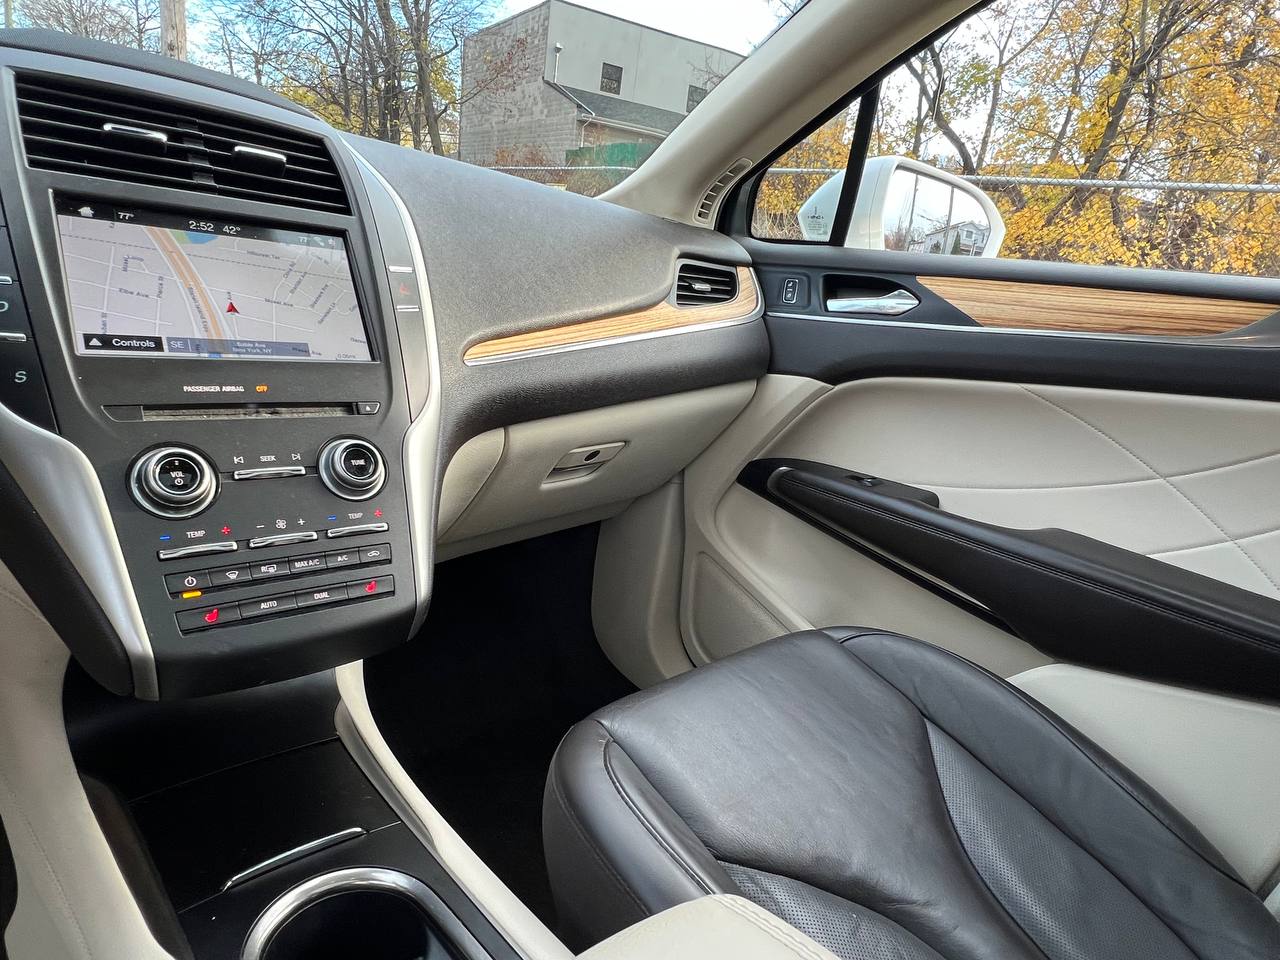 Used - Lincoln MKC Select AWD SUV for sale in Staten Island NY